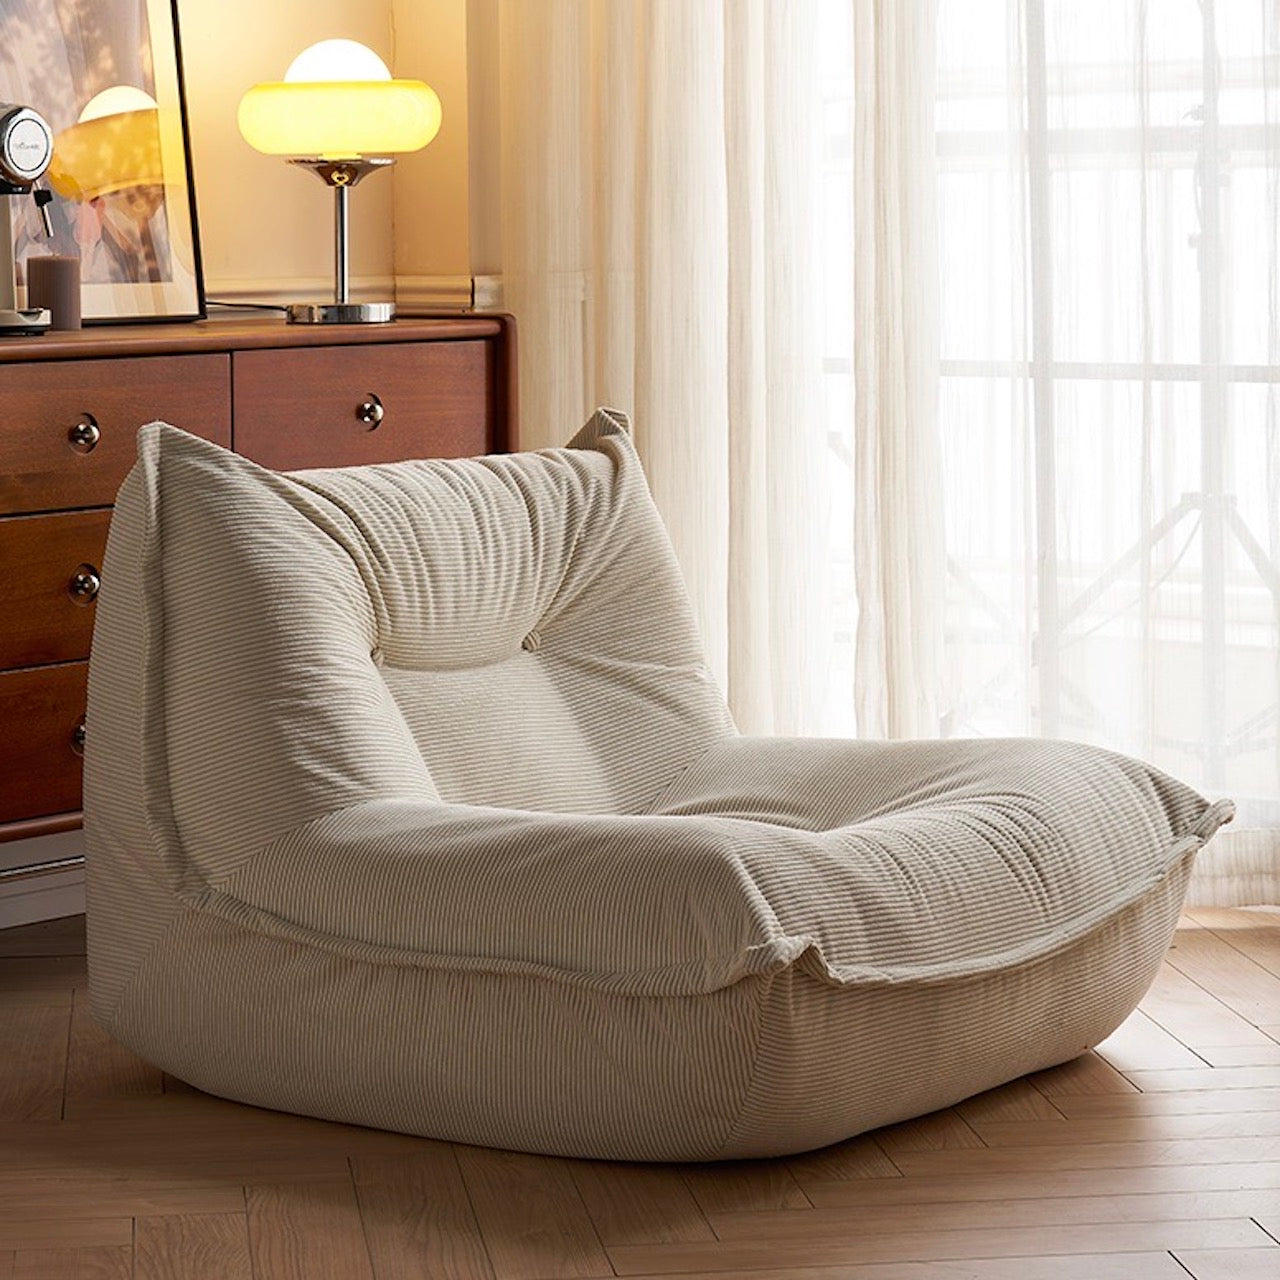 White Corduroy Caterpillar Lounge Chair in a cozy living room setting